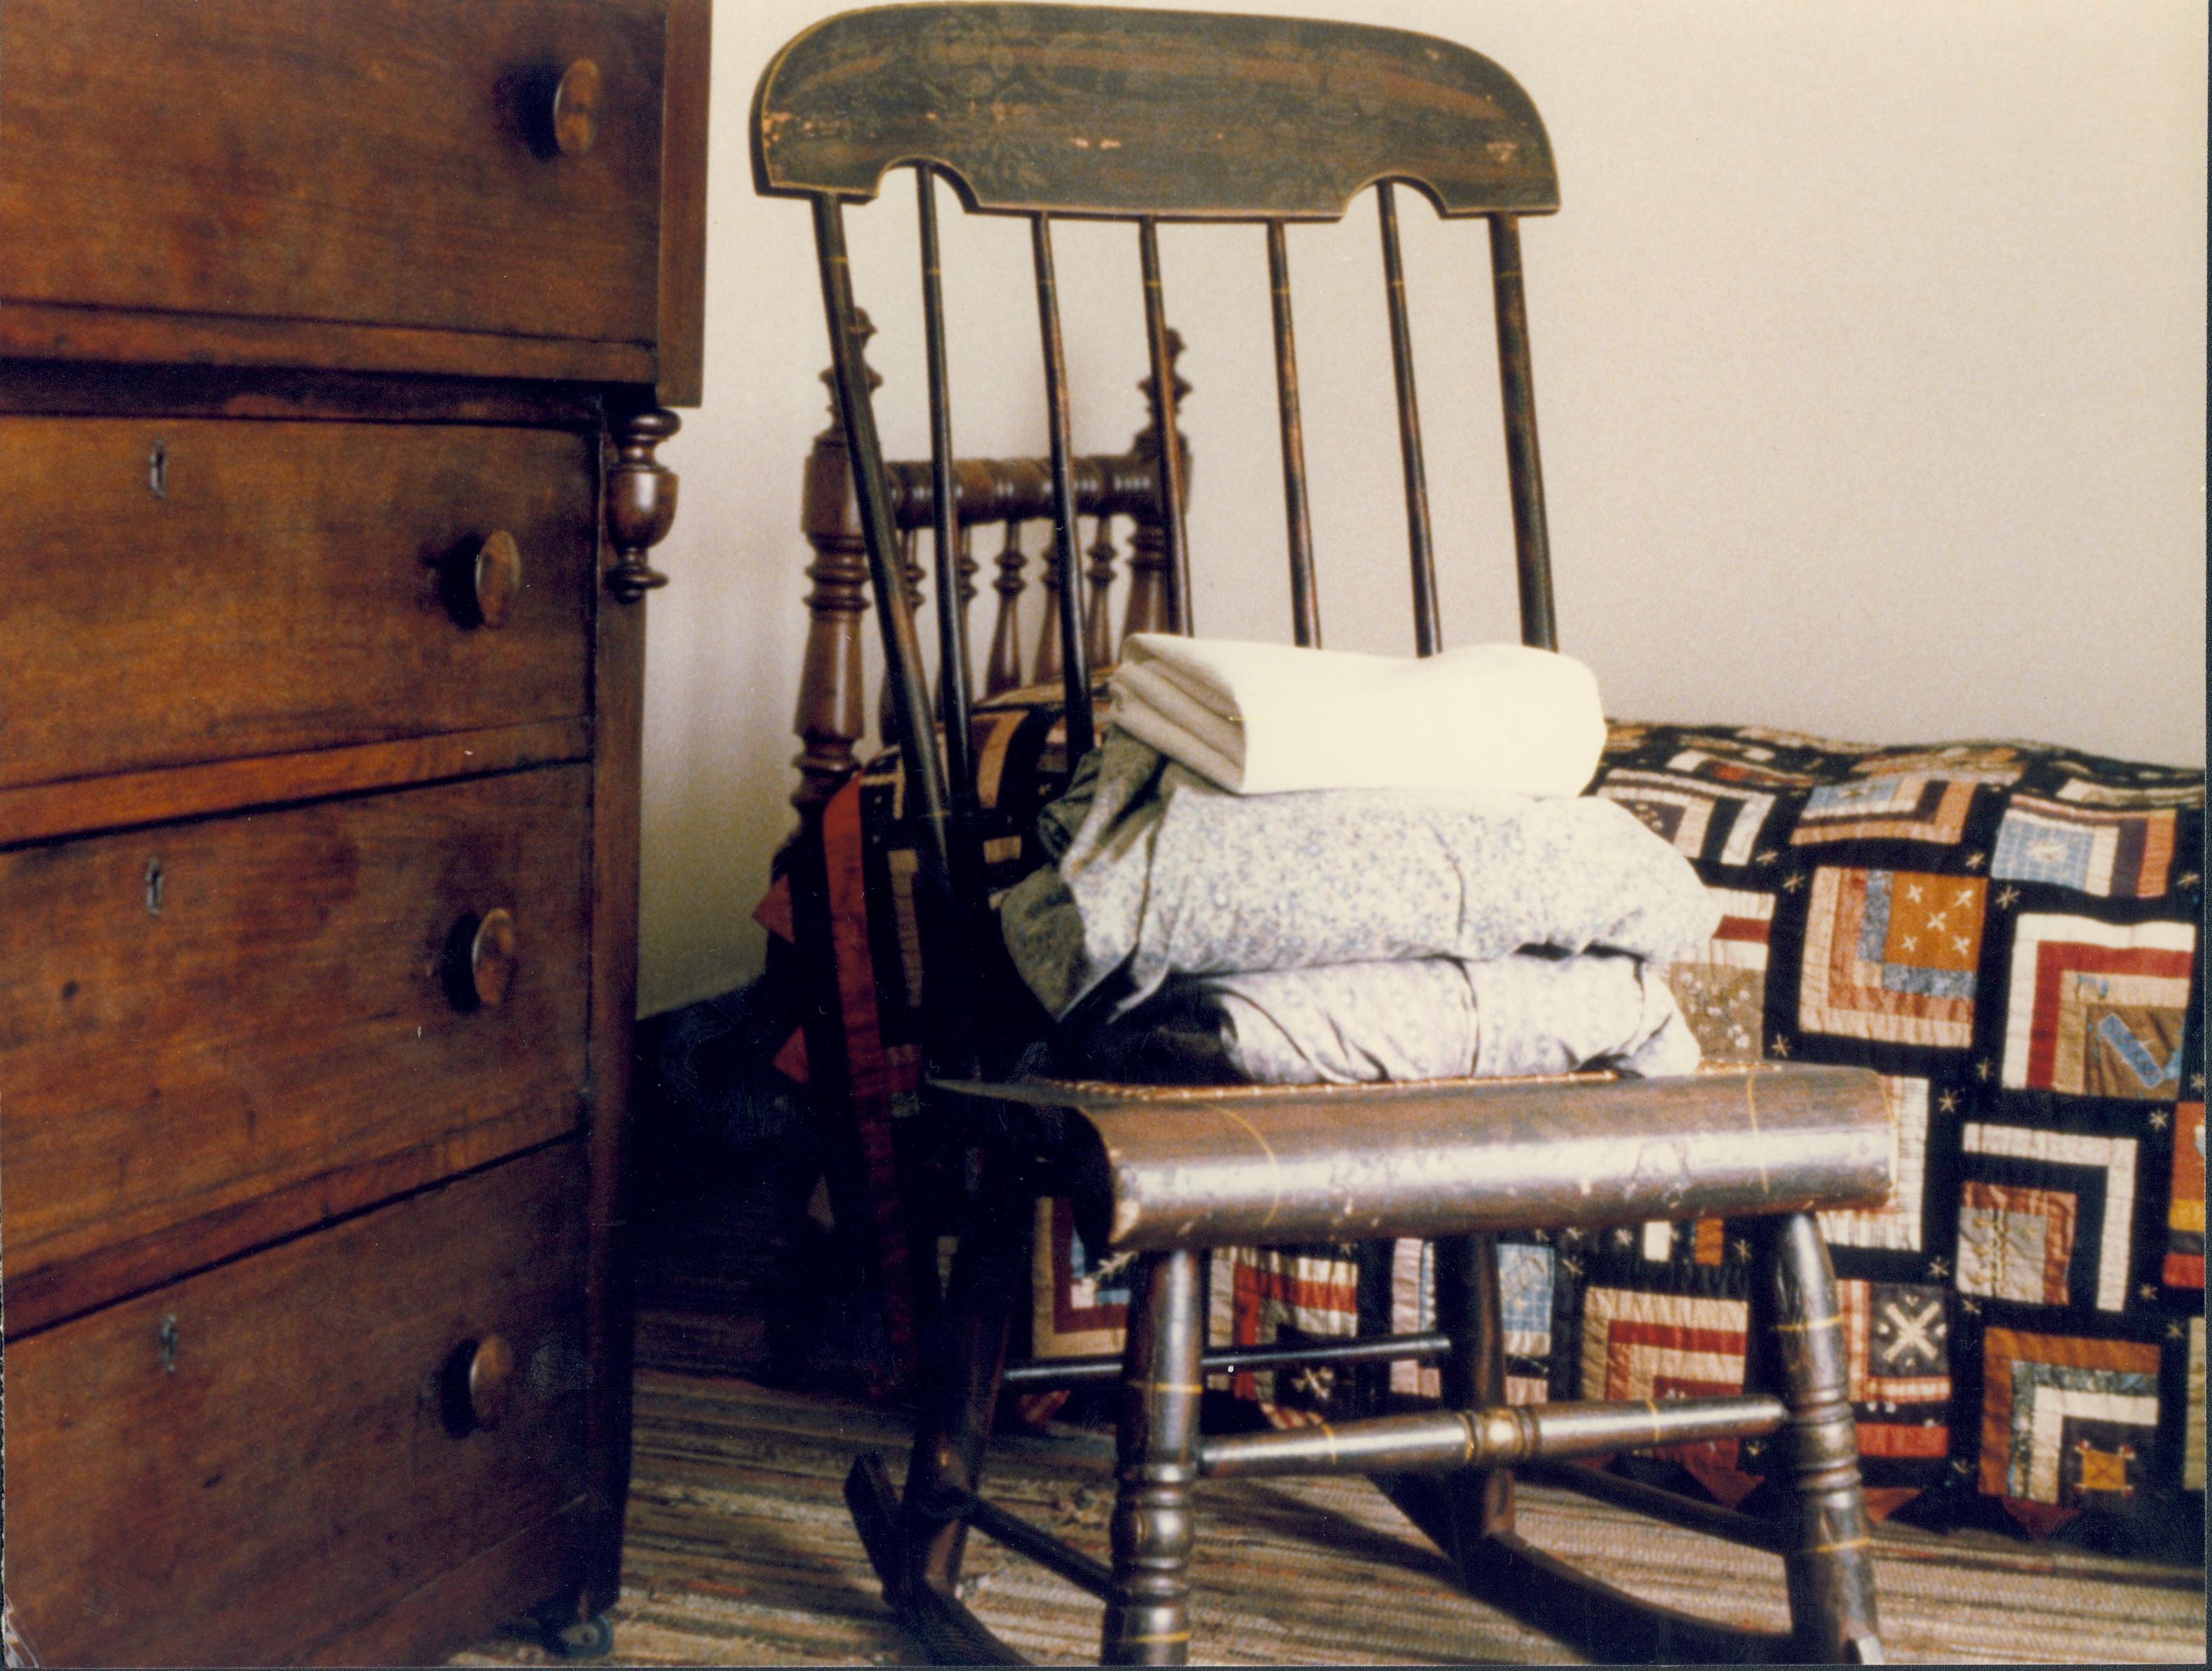 NA Lincoln, Home, chair, dresser, drawers, quilt, bed